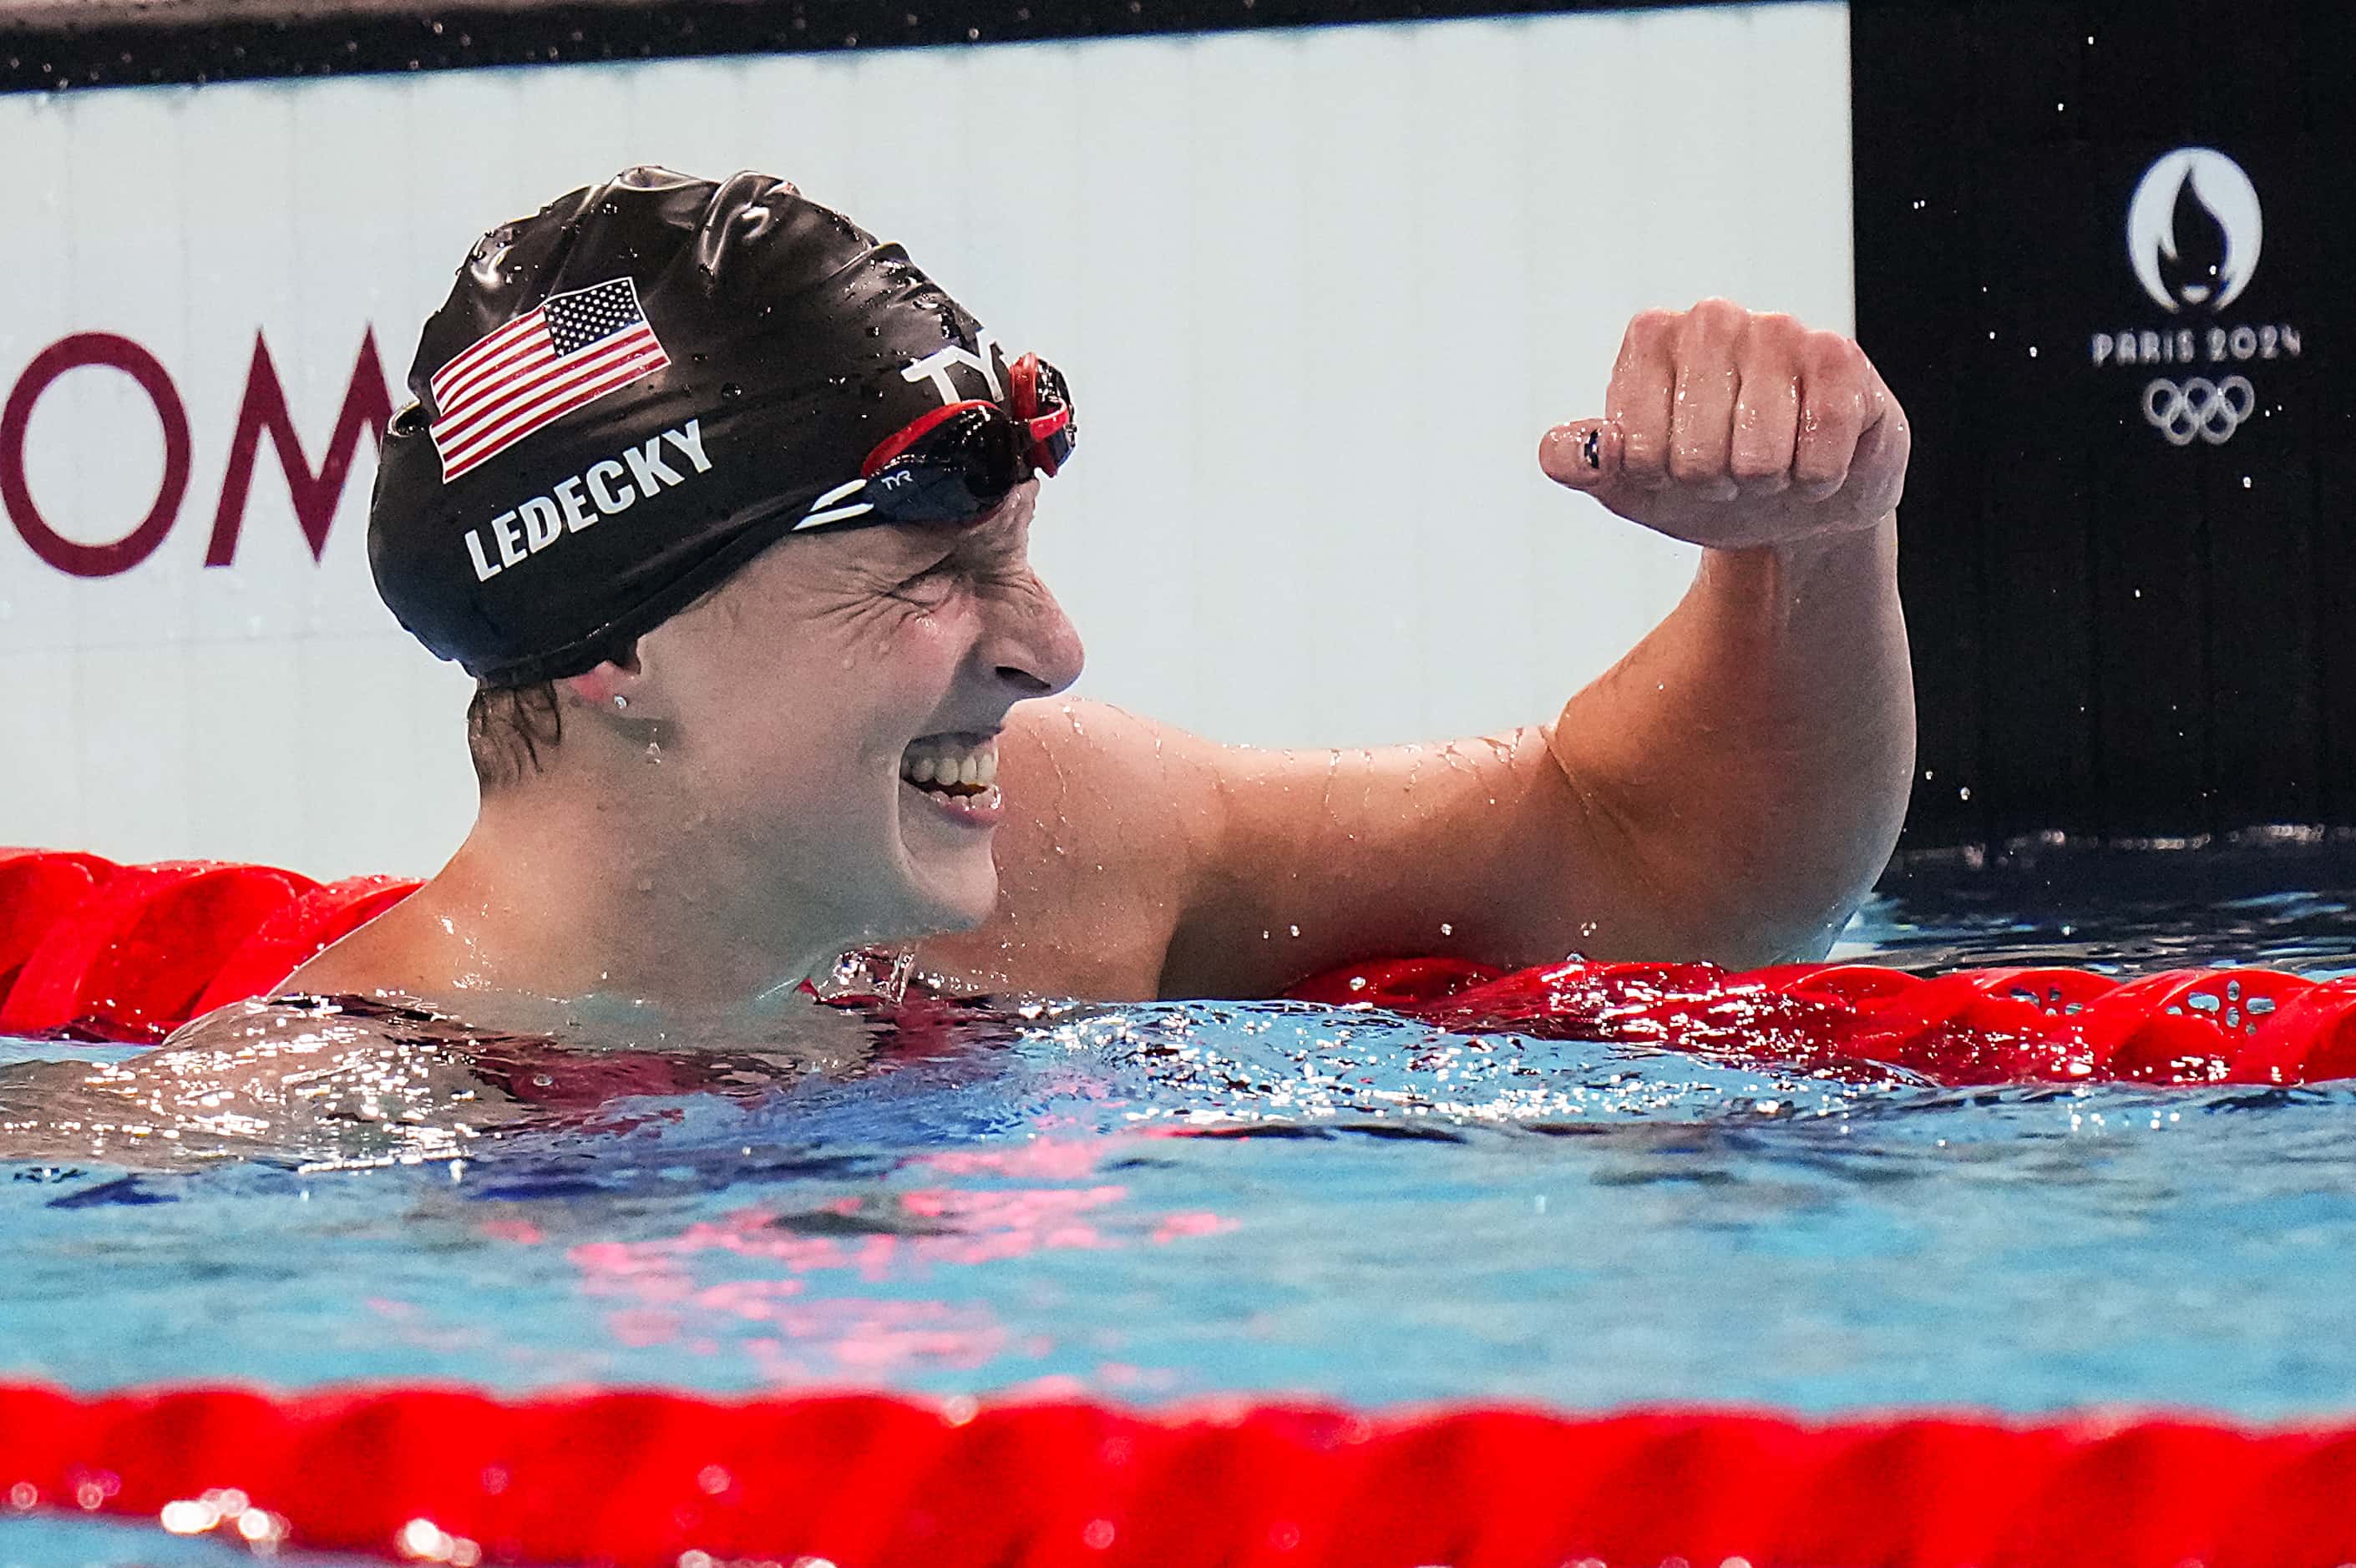 Katie Ledecky of the United States celebrates after winning the women's 1500-meter freestyle...